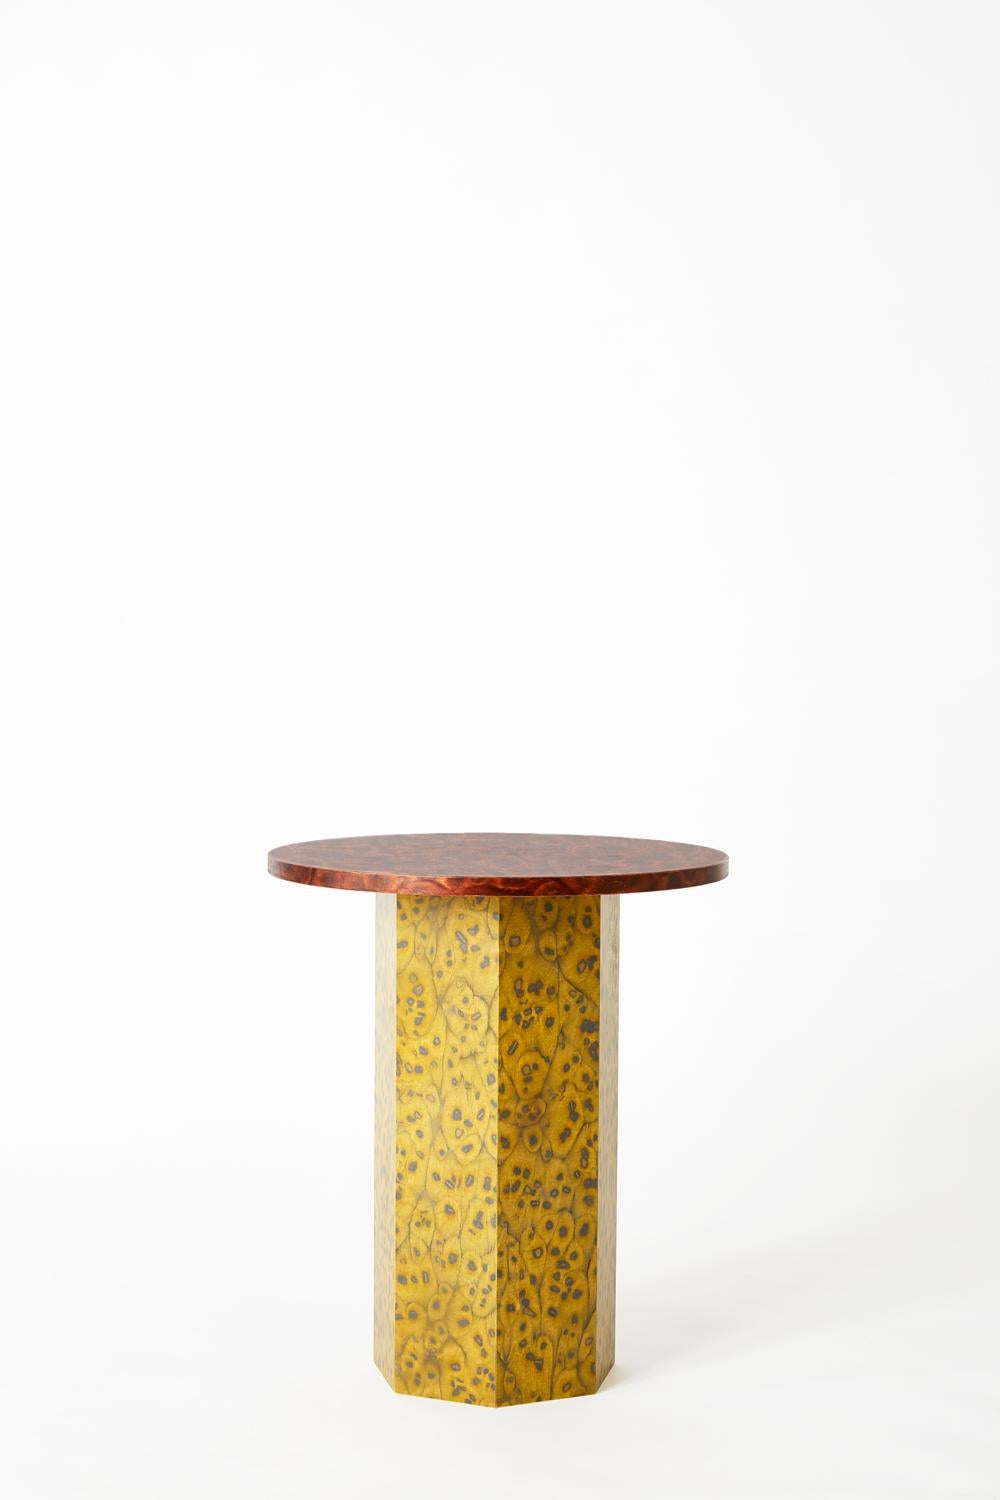 Round Slim Osis Septagon base side table by Llot Llov
Edition 5 
Dimensions: Ø 45 cm x H 52 cm
Materials: core board birch


With OSIS Edition 5 LLOT LLOV is deepening the understanding of the impact of salt and pigment. Colour and surface